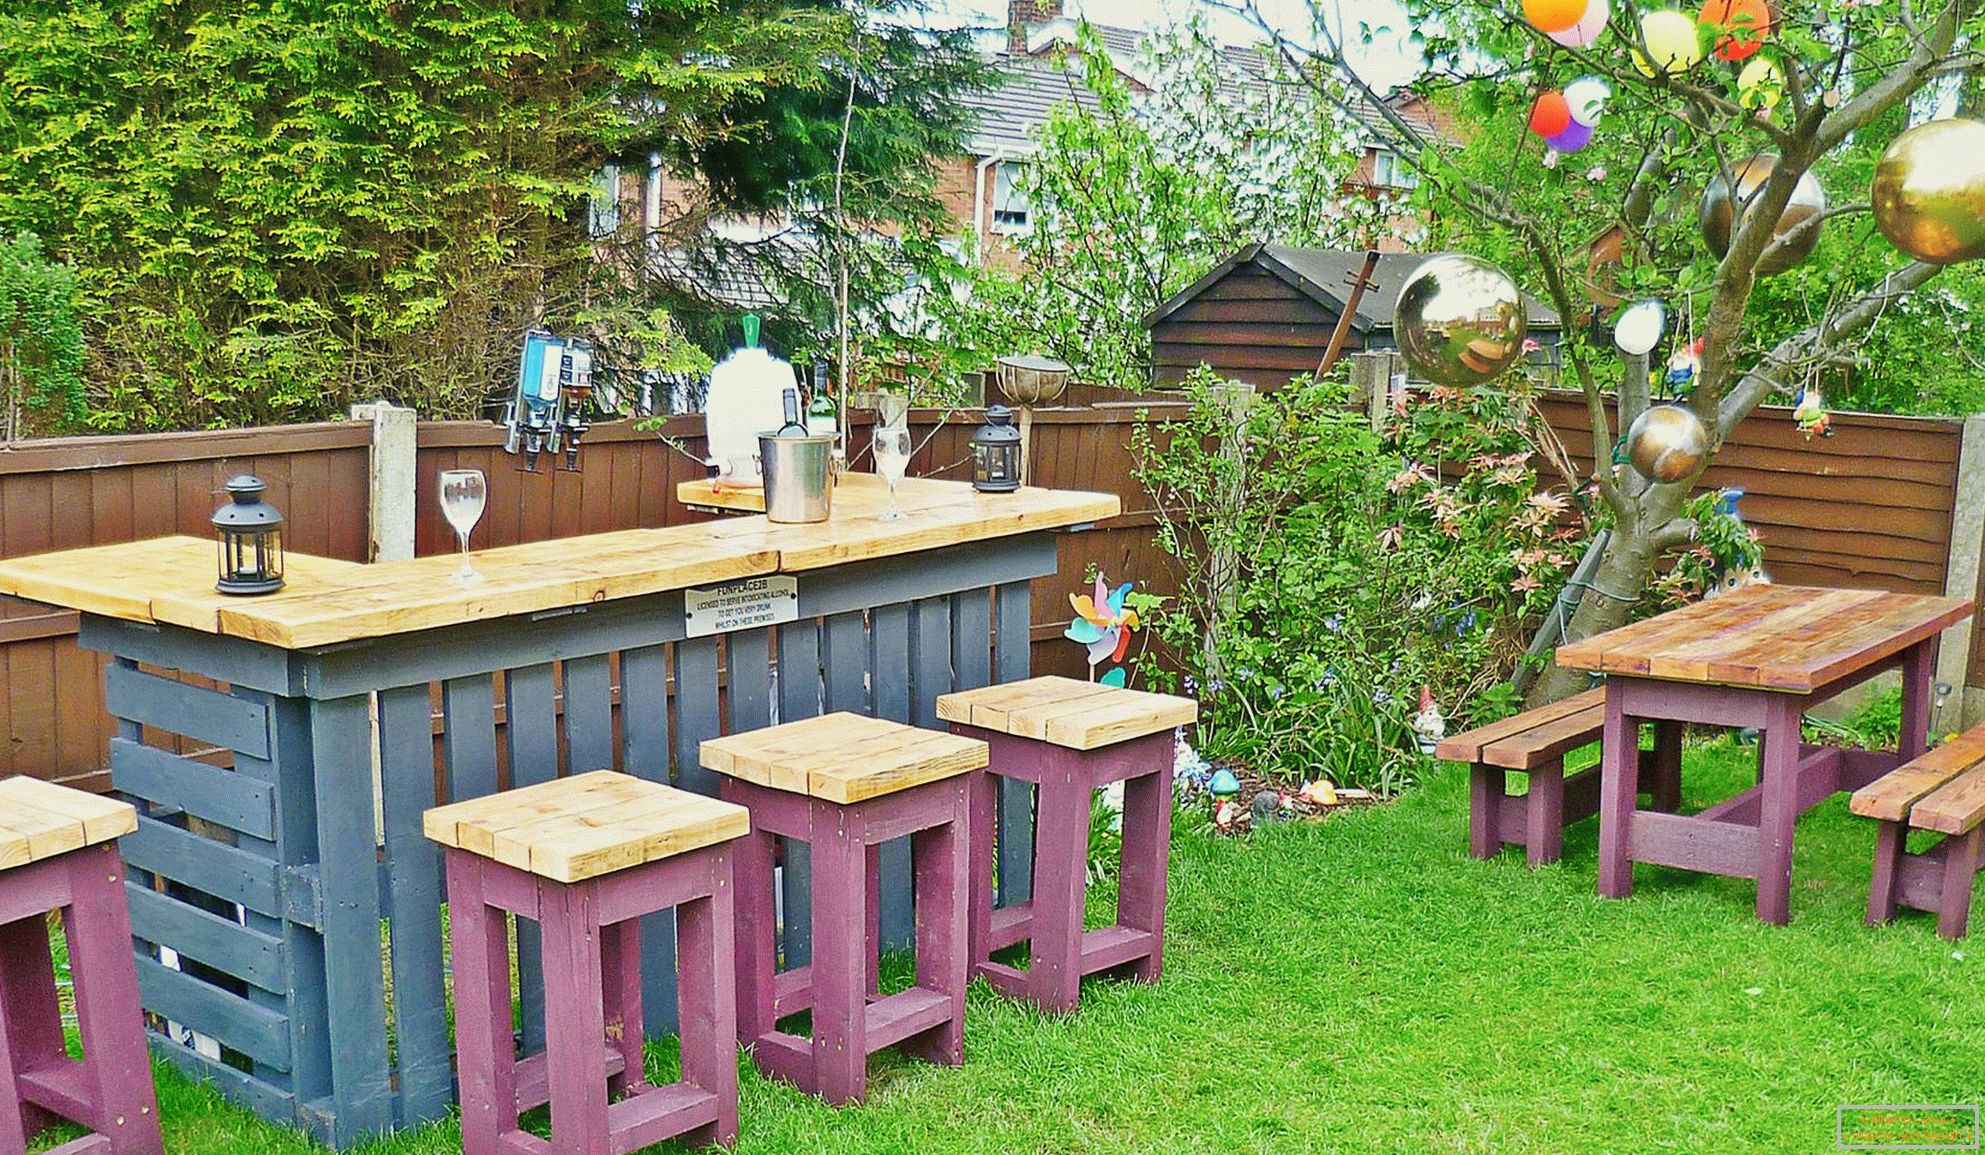 Furniture for backyard from pallets